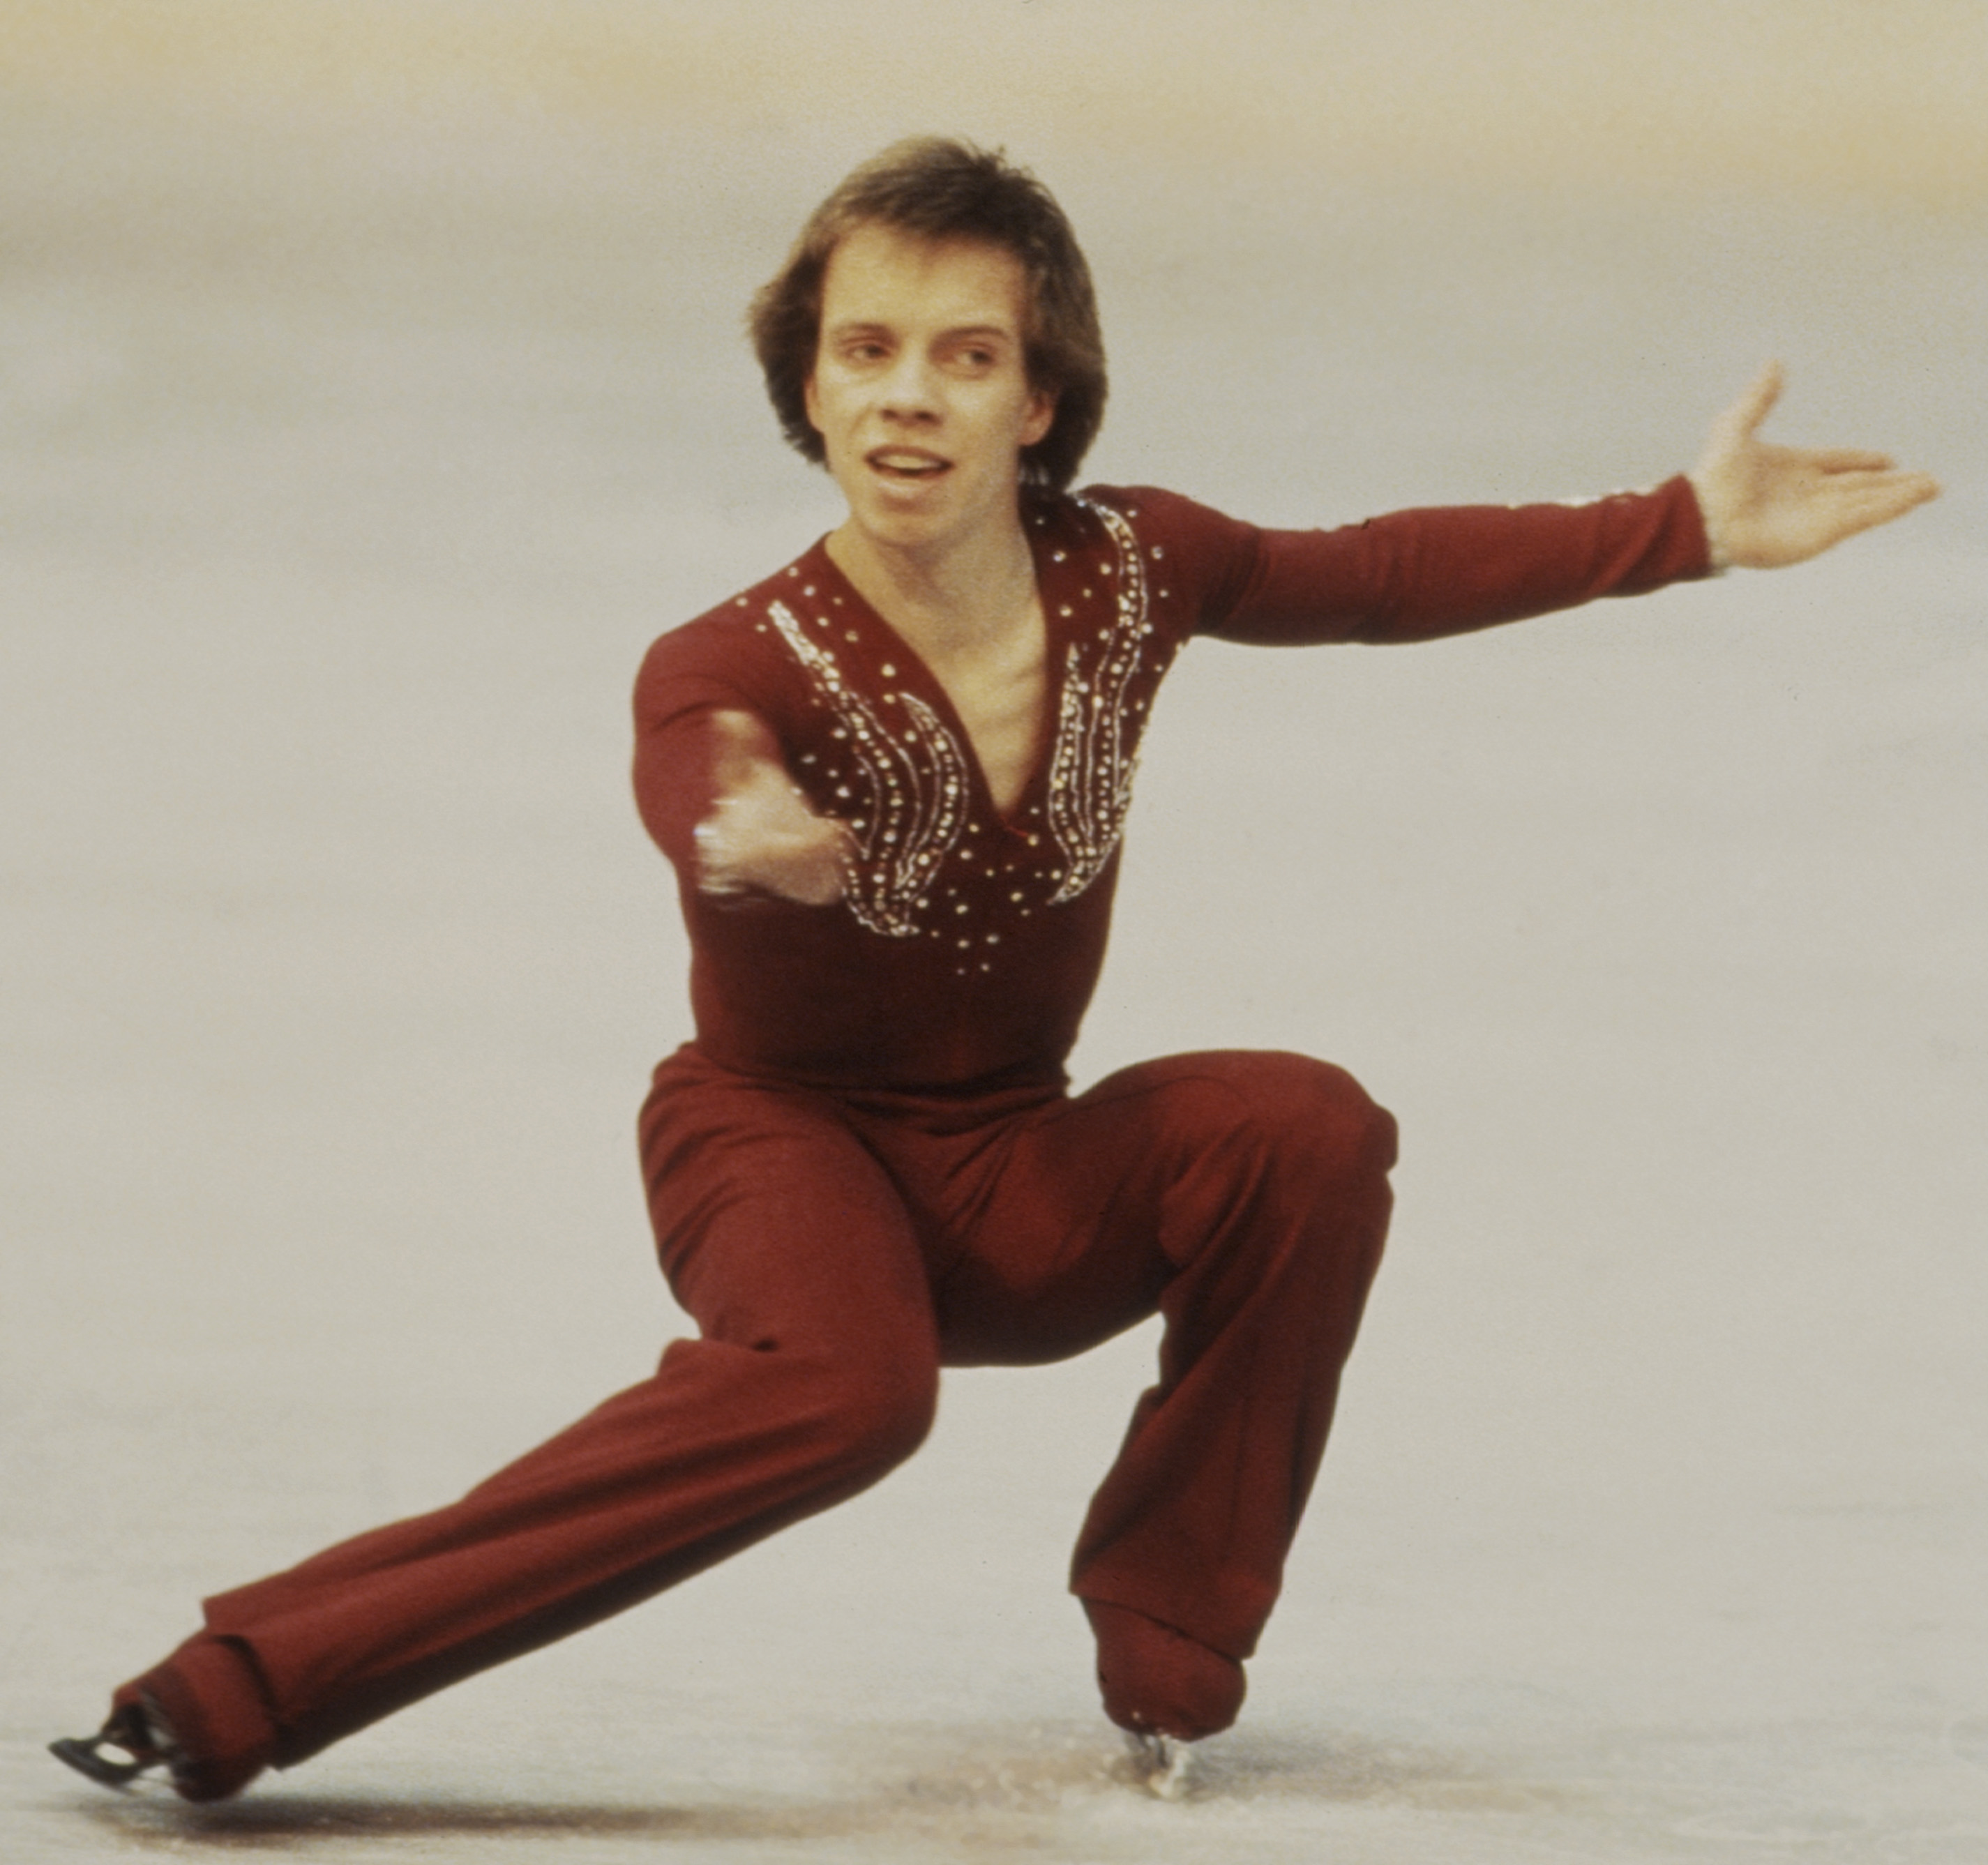 Scott Hamilton competes in the Men's Singles competition at the 1981 World Figure Skating Championships on March 6, 1981 | Source: Getty Images